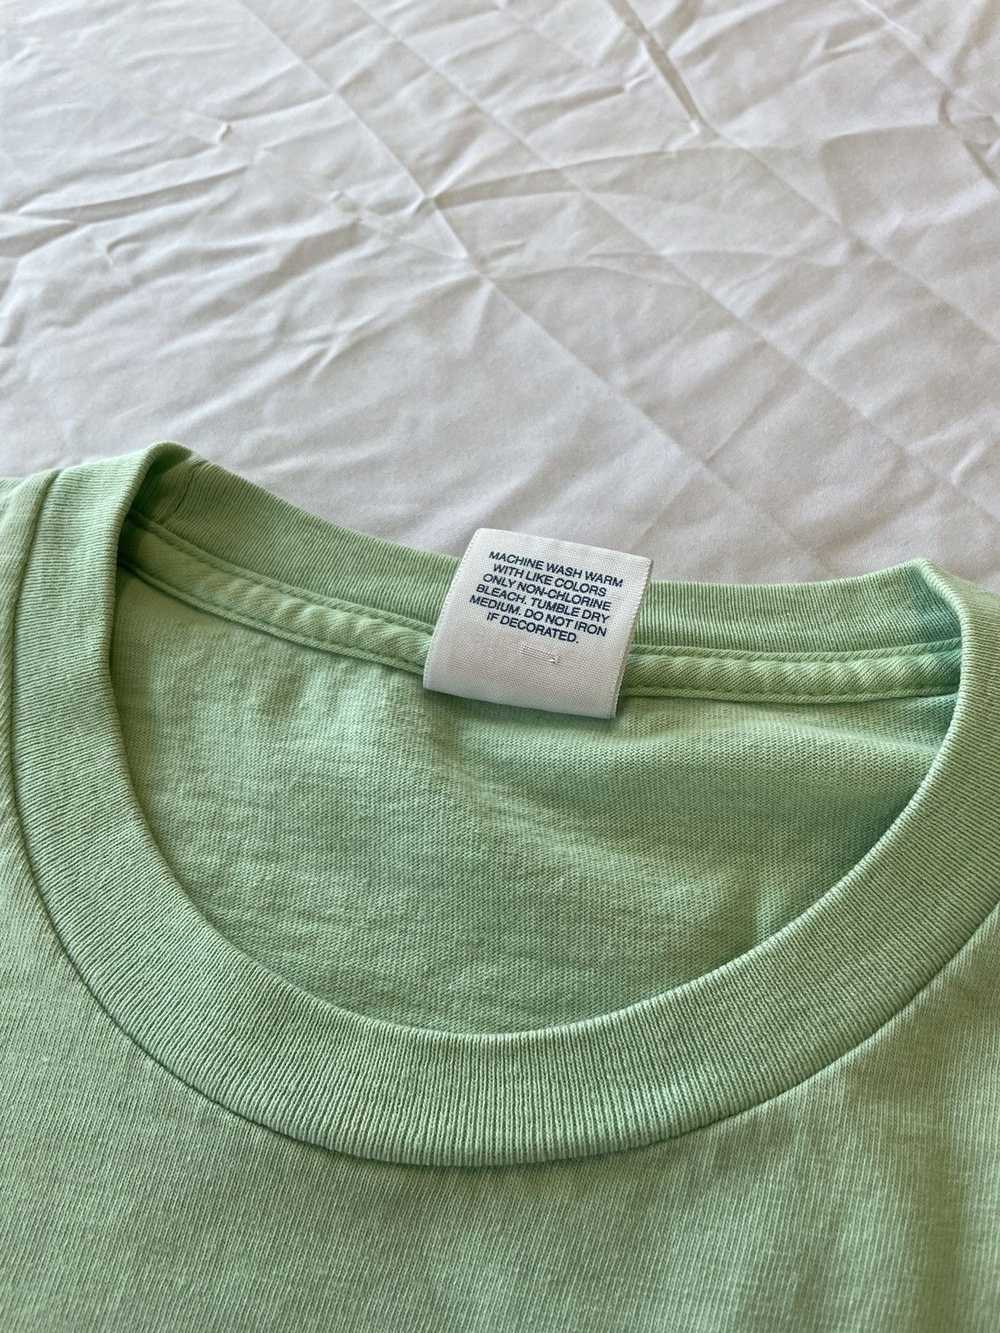 Supreme Supreme Horace Andy Tee Mint Green Medium - image 6